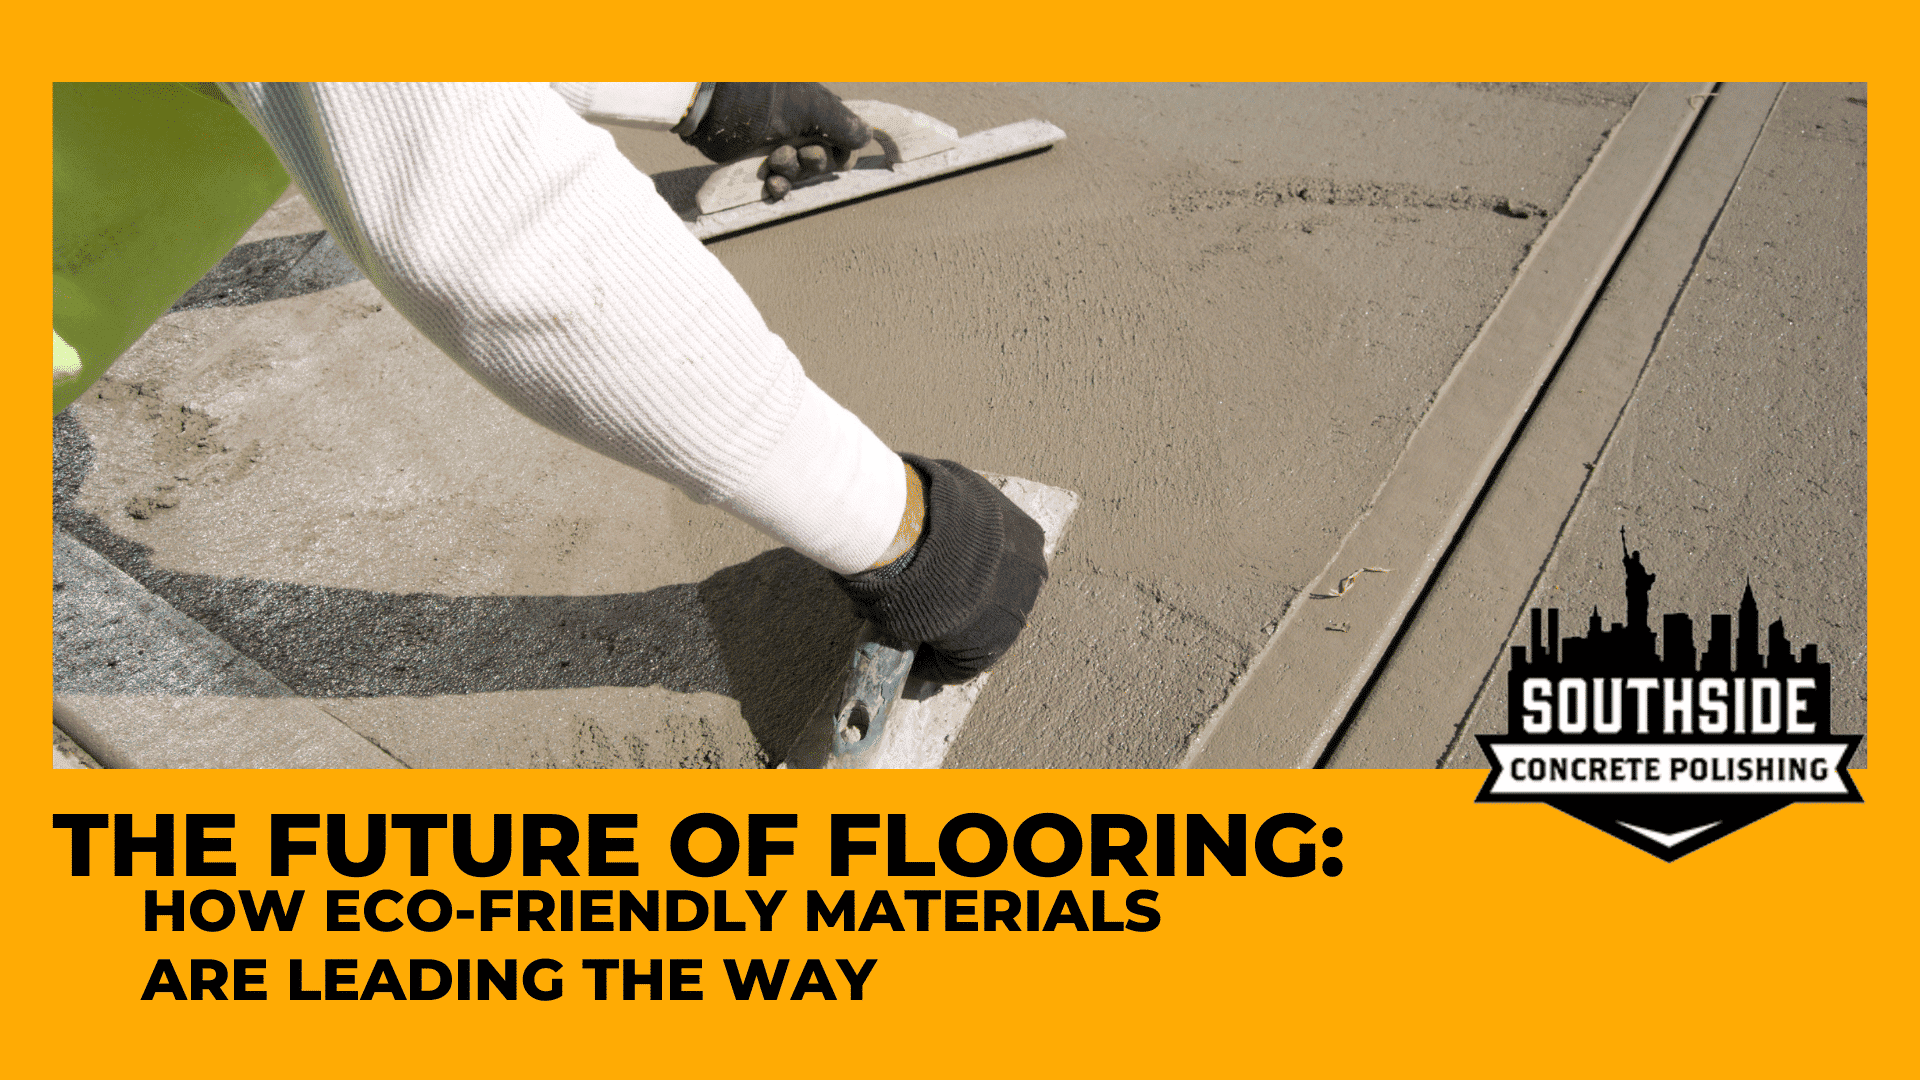 The Future of Flooring: How Eco-Friendly Materials are Leading the Way 10